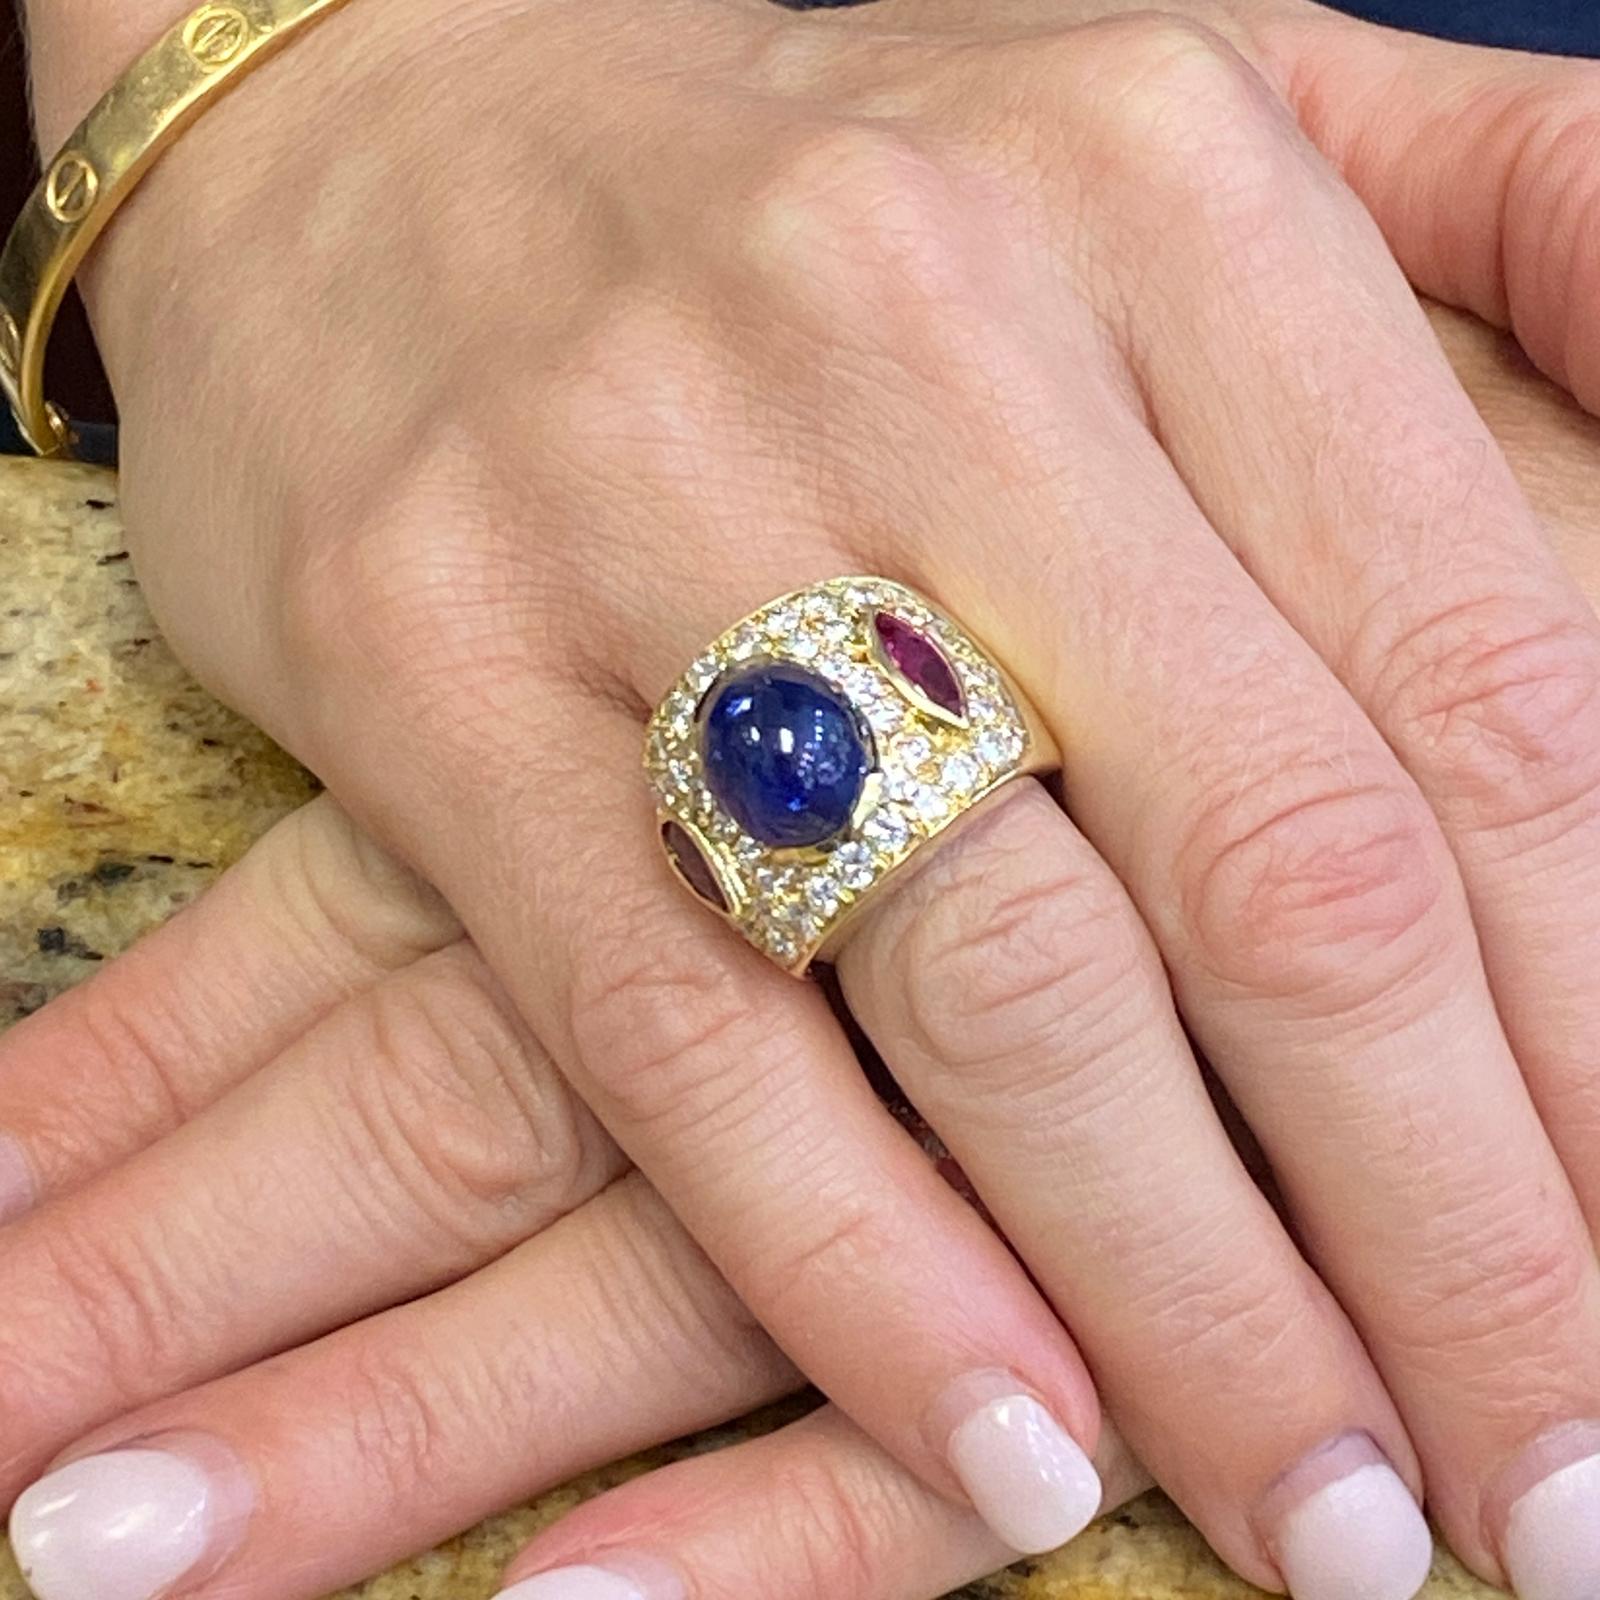 Fabulous Ceylon blue sapphire, ruby, and diamond band fashioned in 18 karat yellow gold. The cabochon natural blue Ceylon sapphire weighs approximately 9.50 carats, and is certified by the AGL. The 52 round brilliant cut diamonds weigh approximately